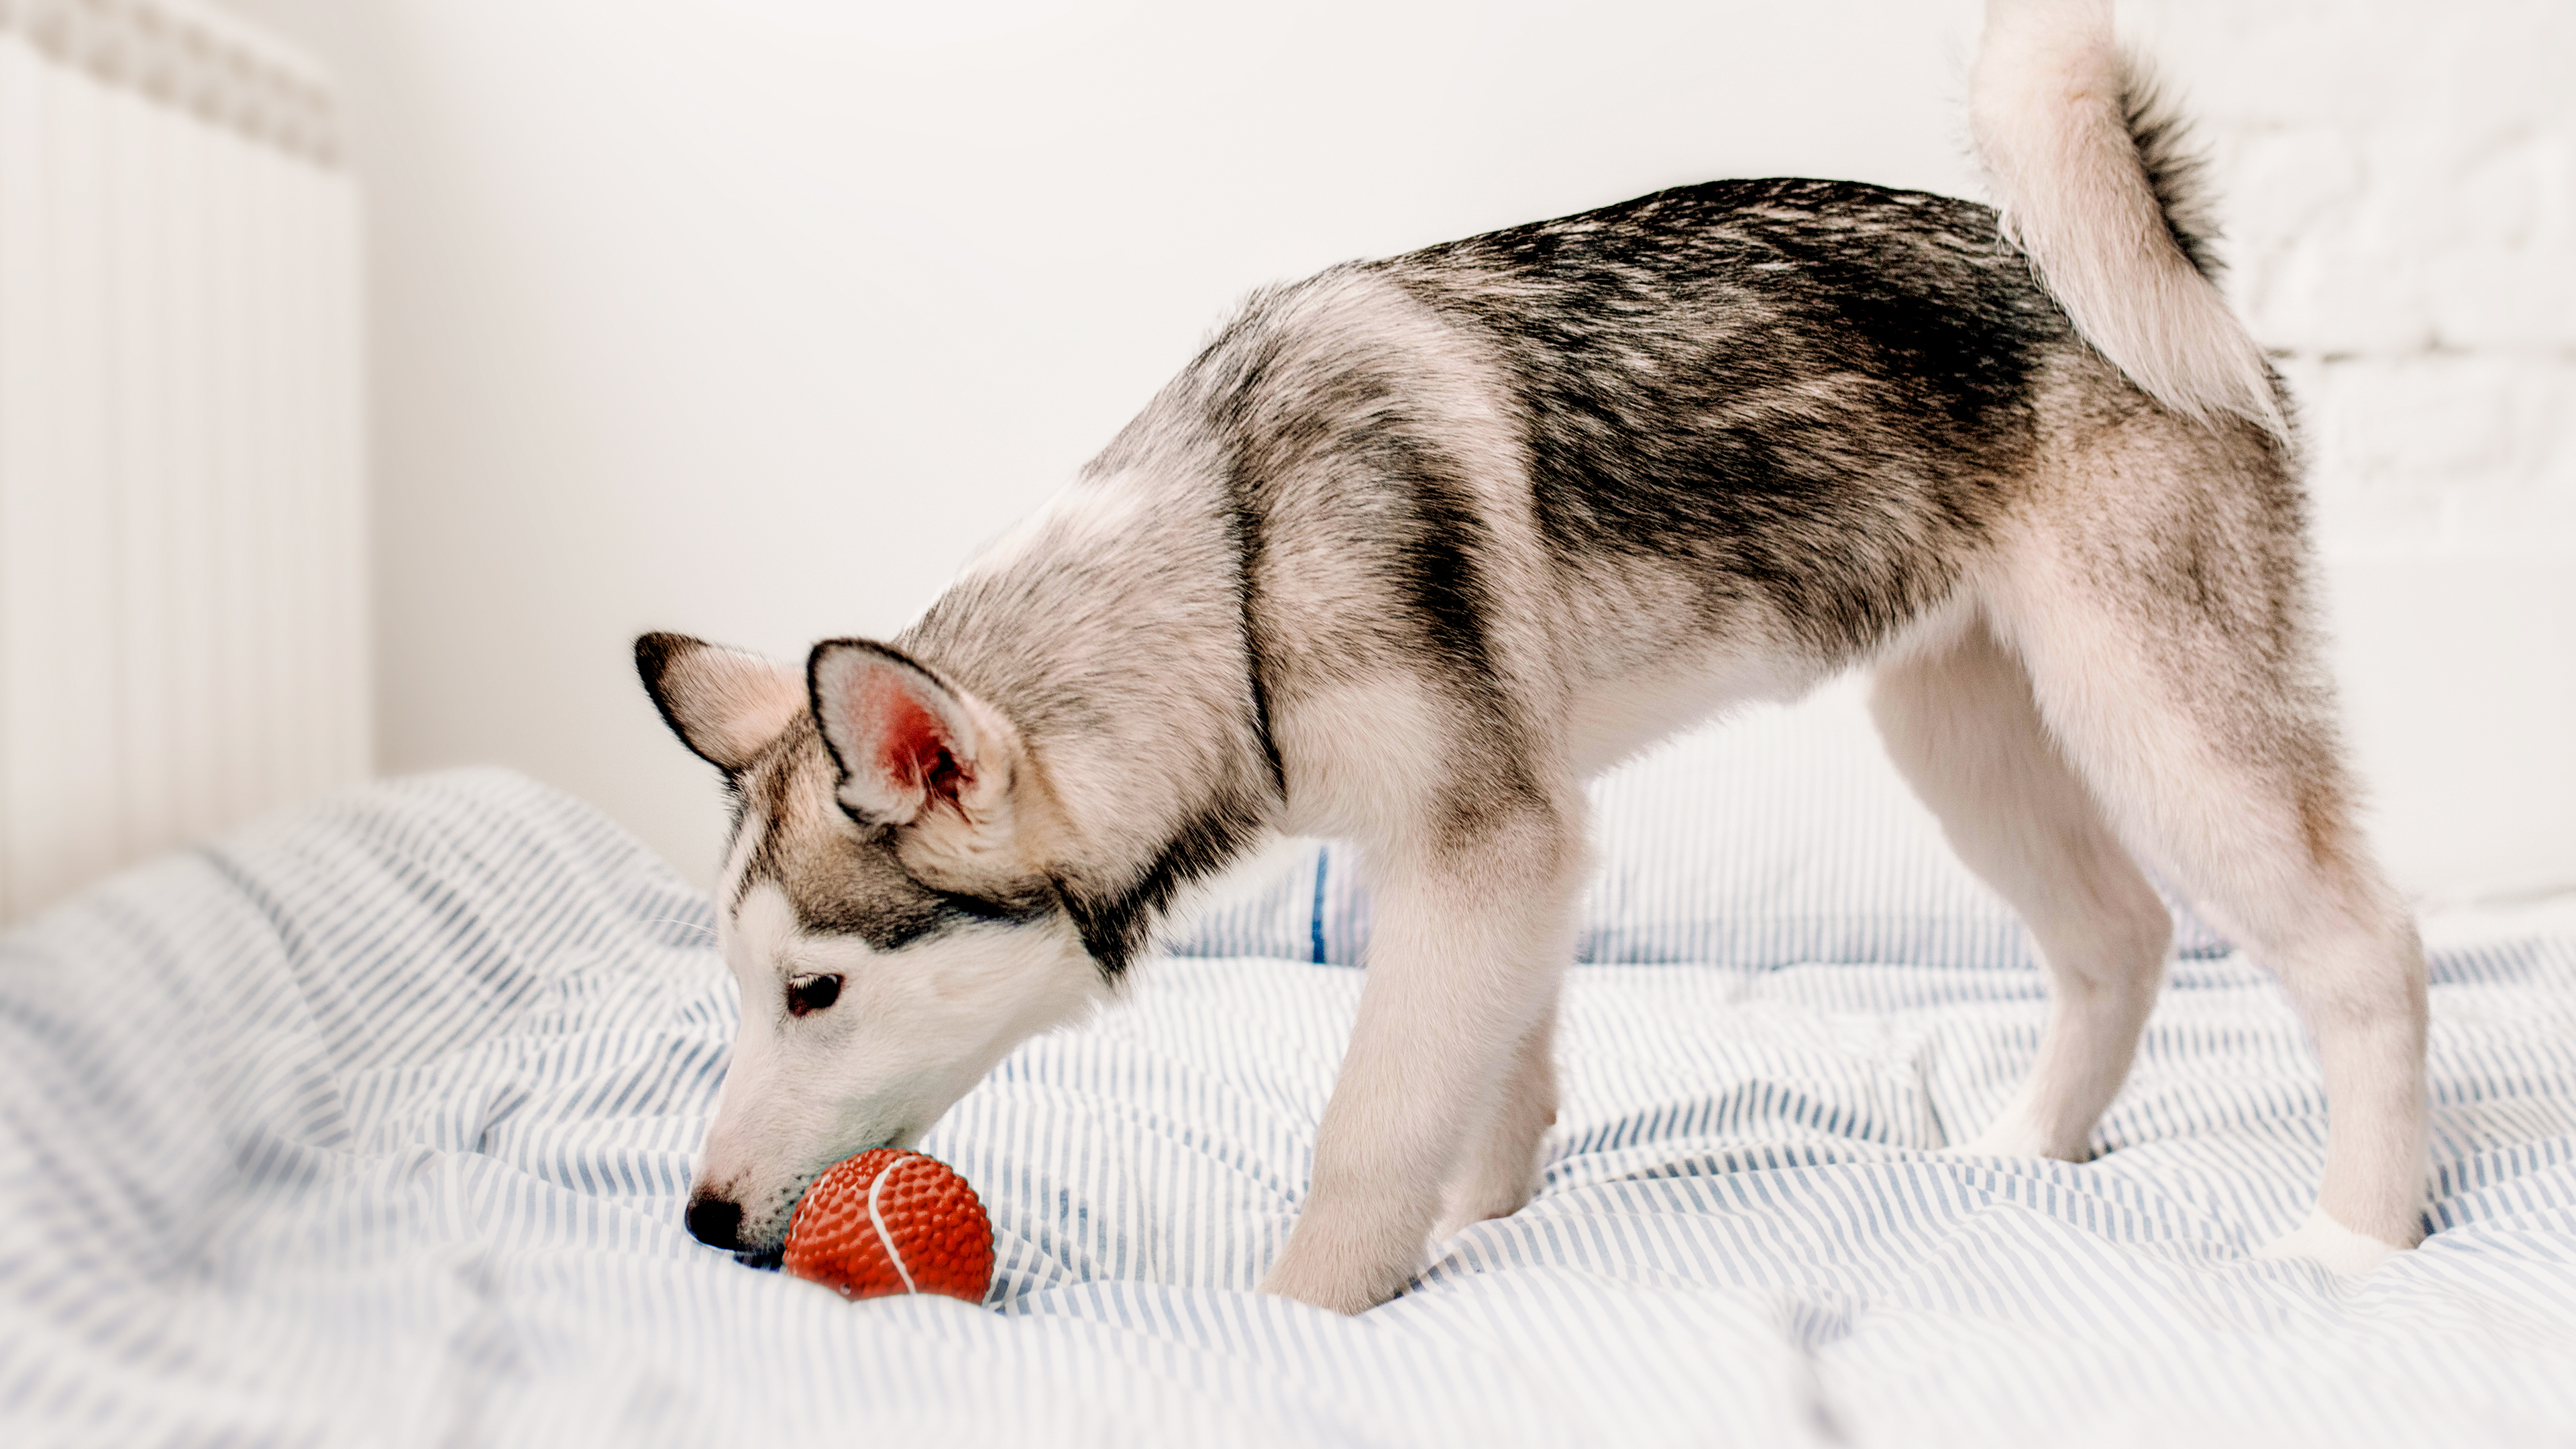 Husky puppy playing with a ball on a striped blanket